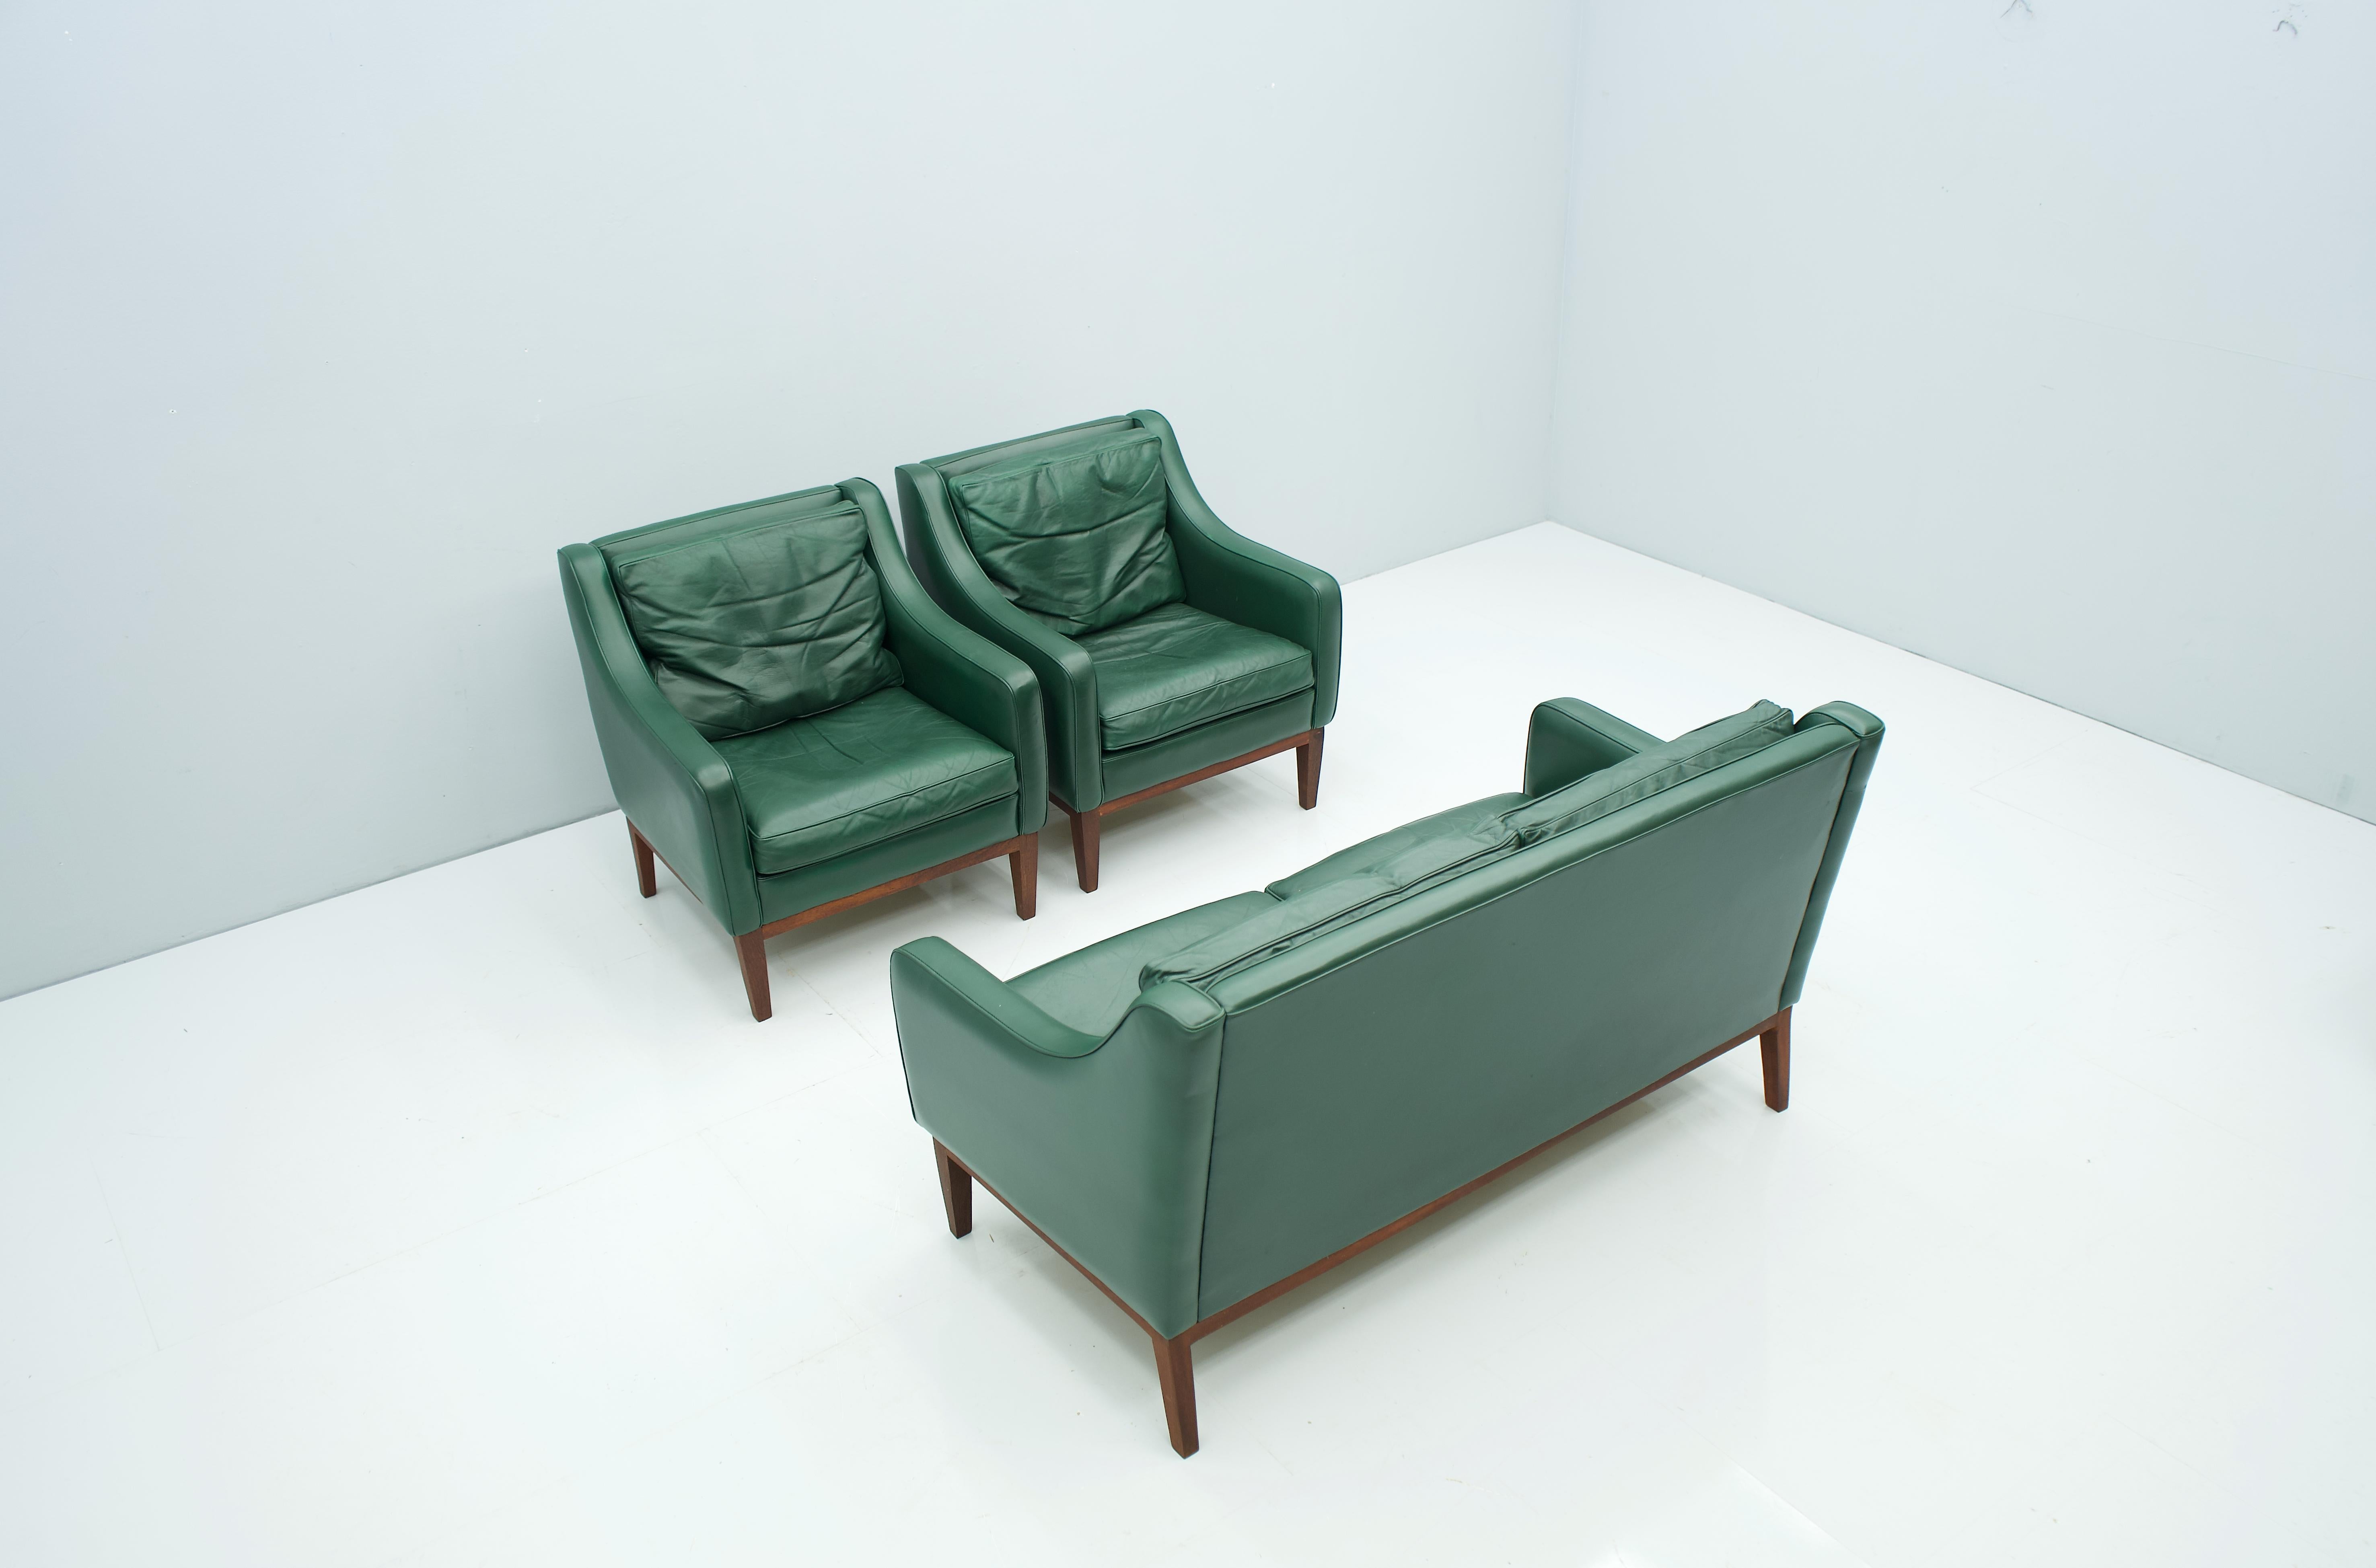 Living Room Set in Green Leather Sofa and Lounge Chairs Italy 1958 Teak For Sale 1